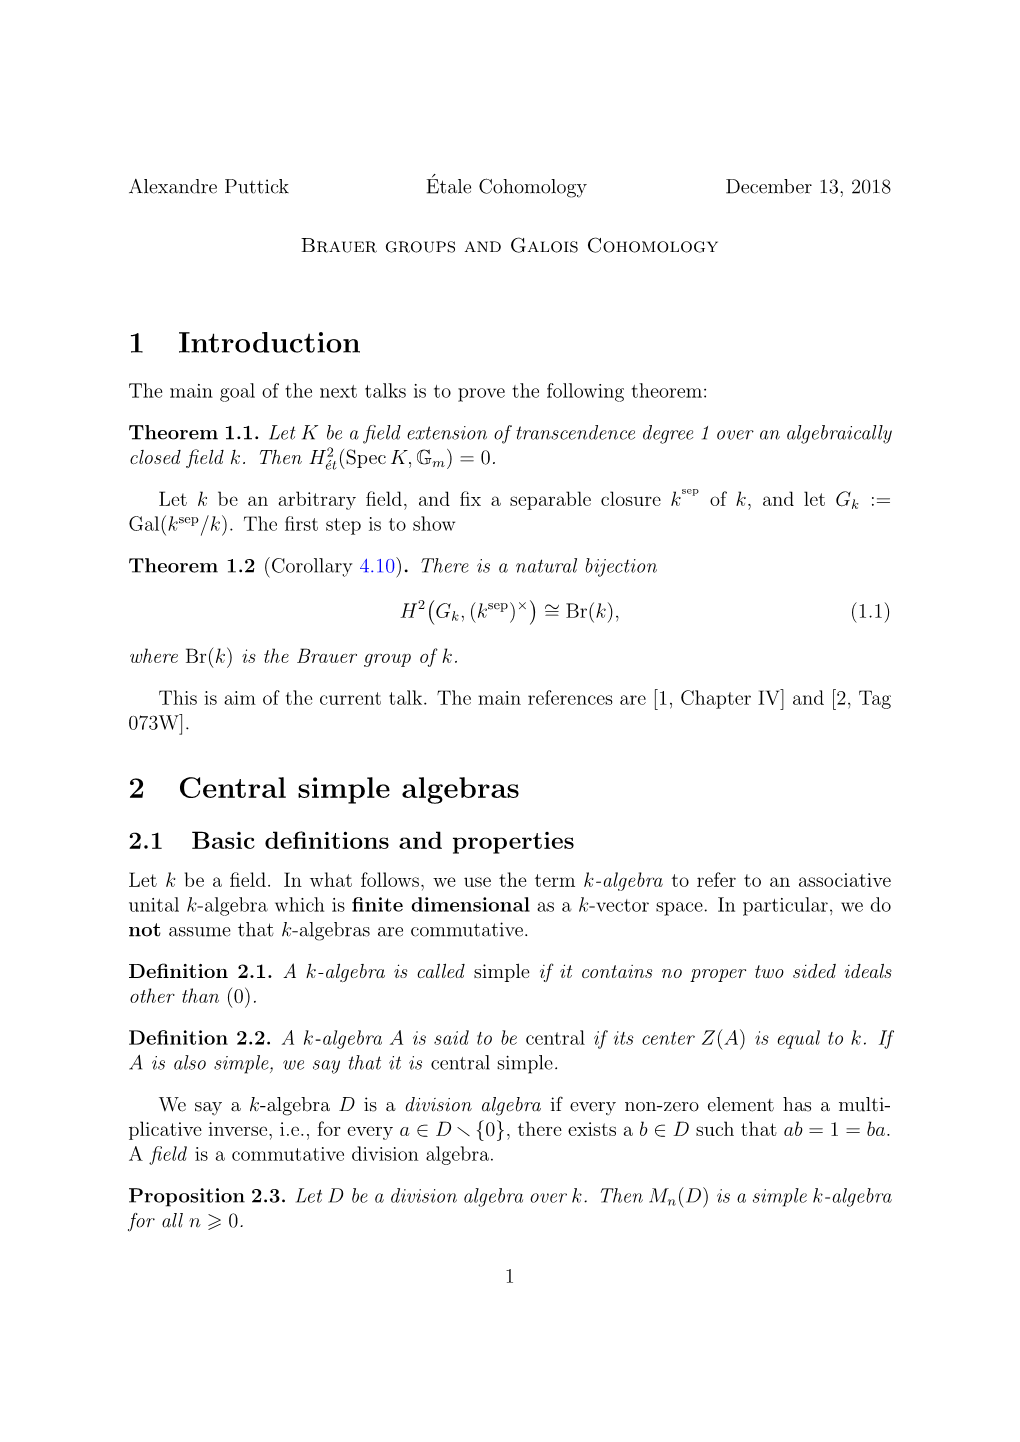 1 Introduction 2 Central Simple Algebras